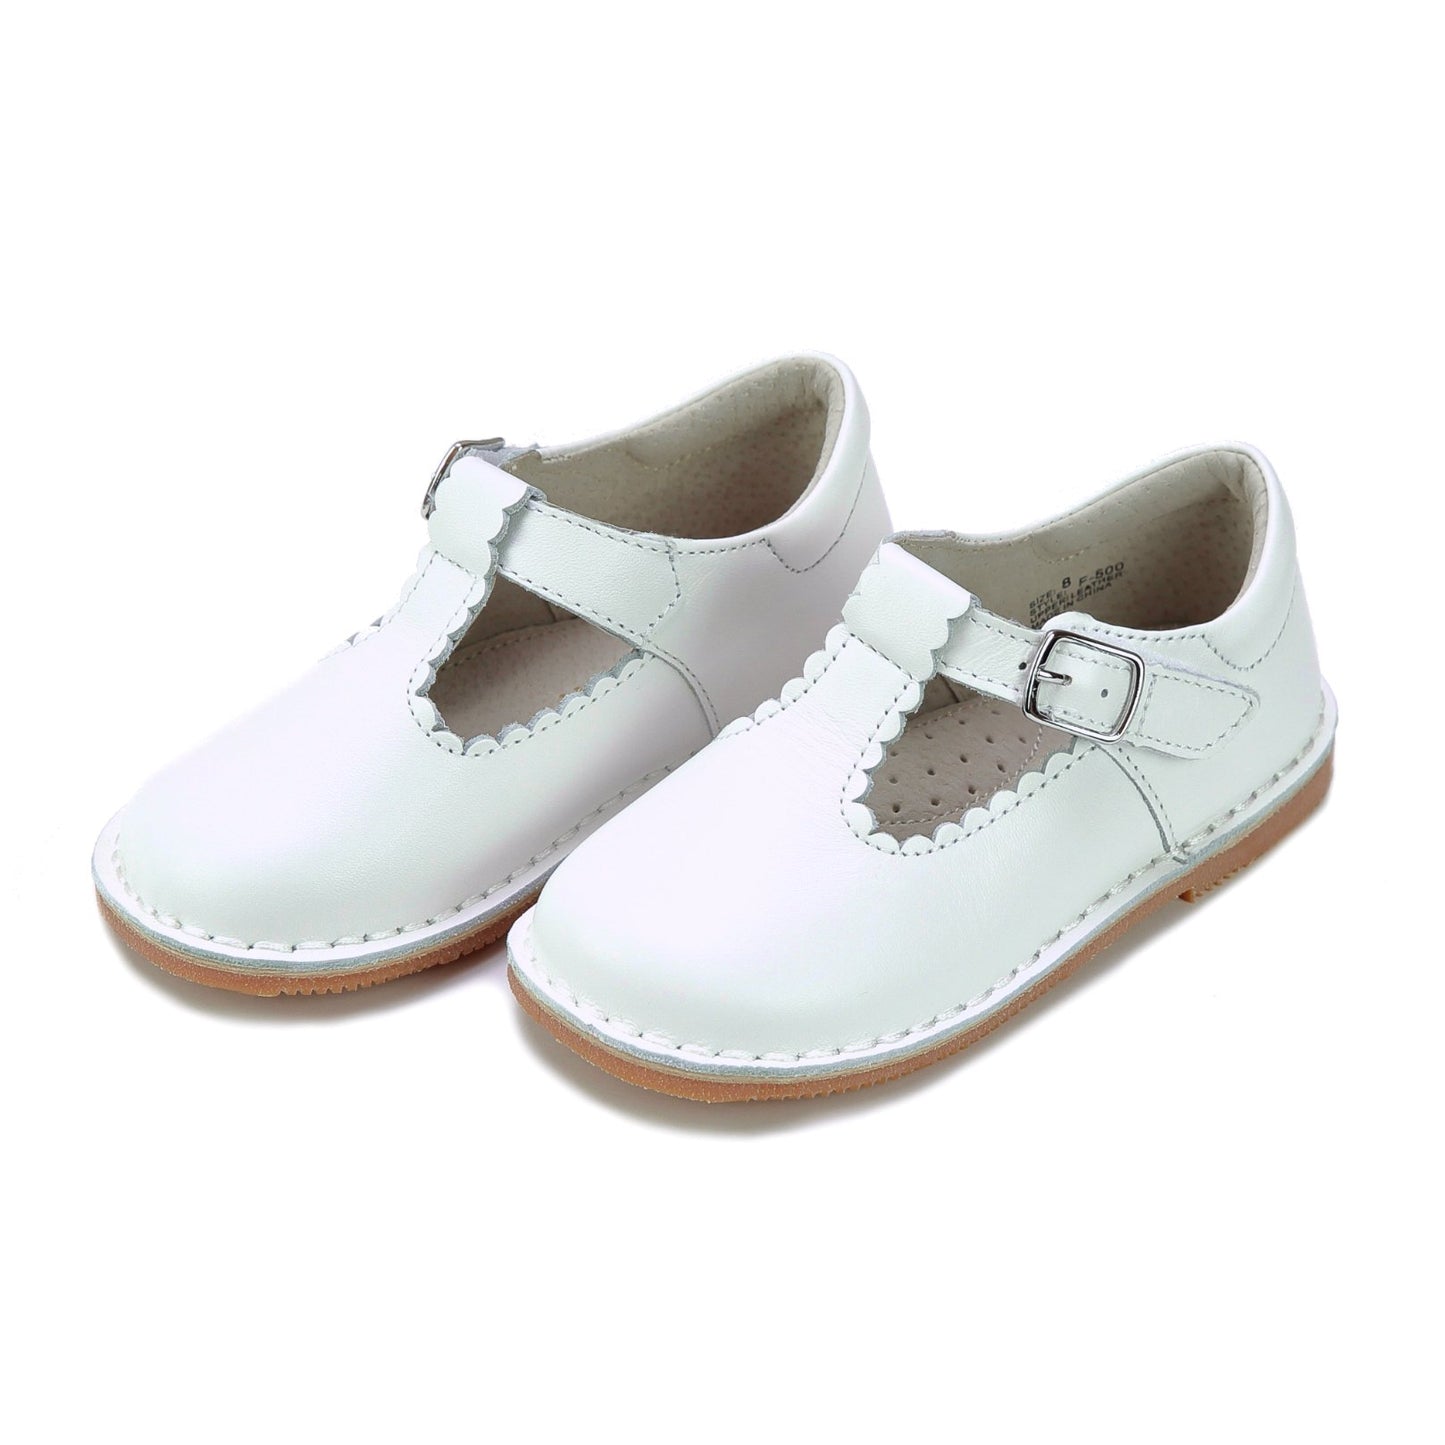 Selina Scalloped T-Strap Mary Jane - White Girls Shoes L'Amour   